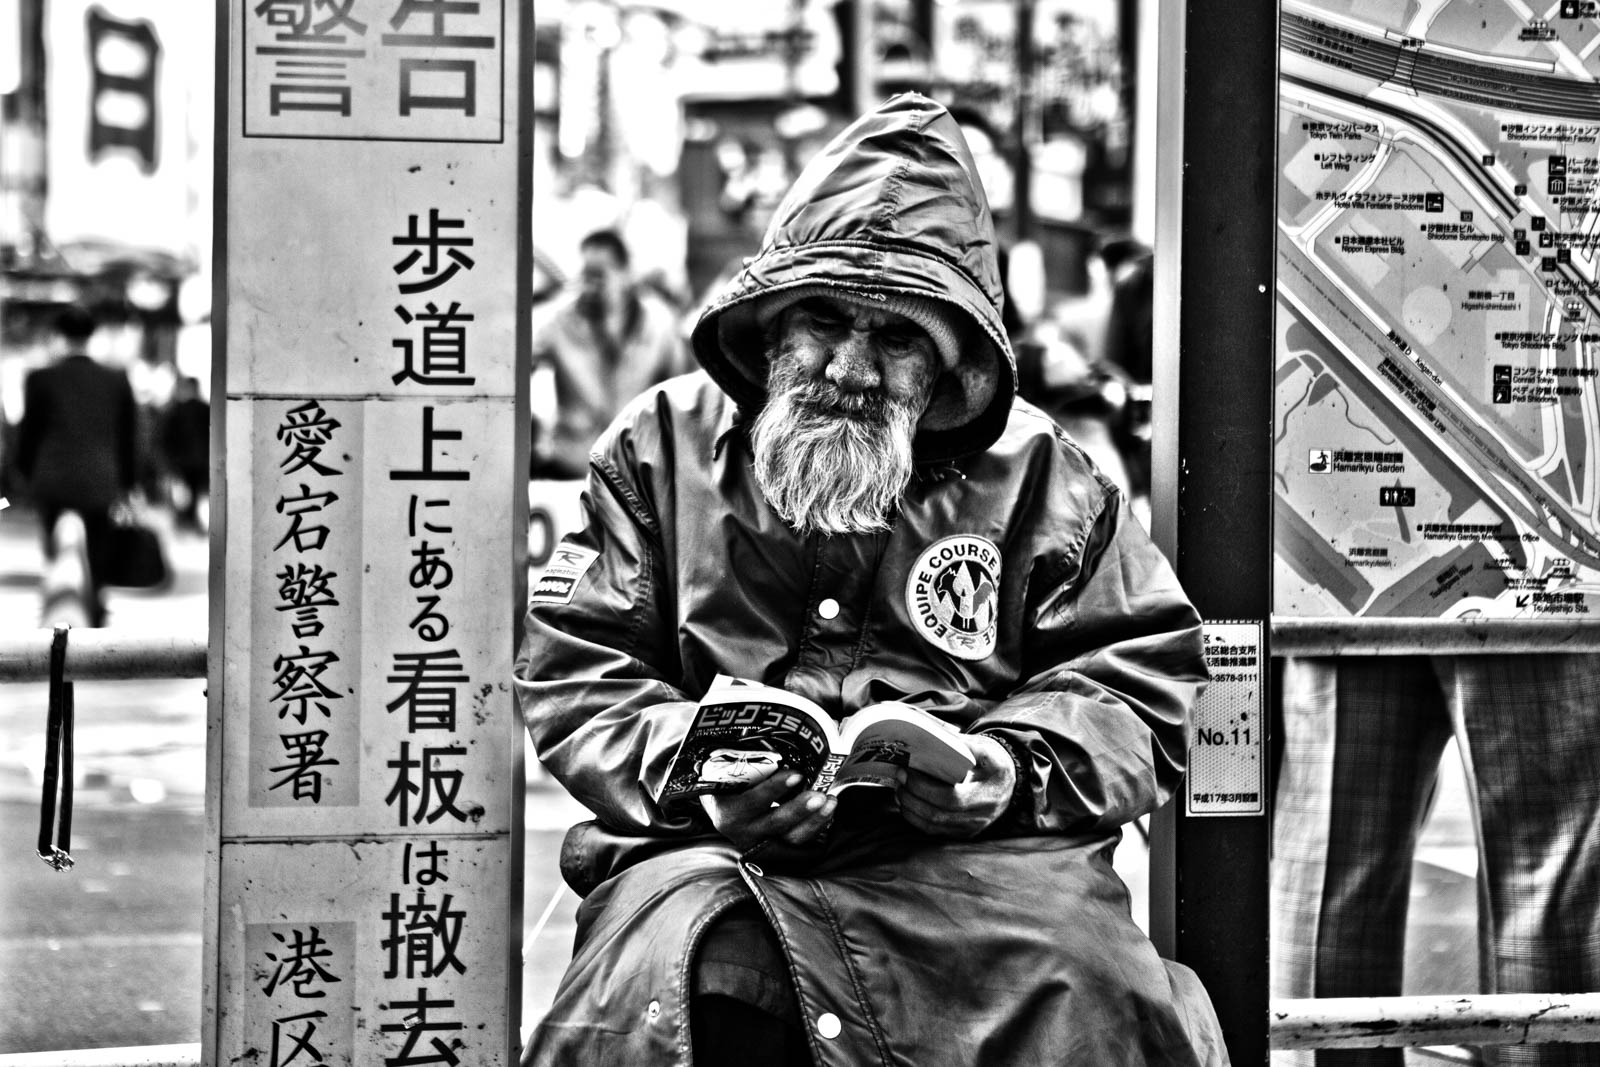 Japanese Homeless at Shimbashi station reading a manga in winter. Street Photography by Victor Borst